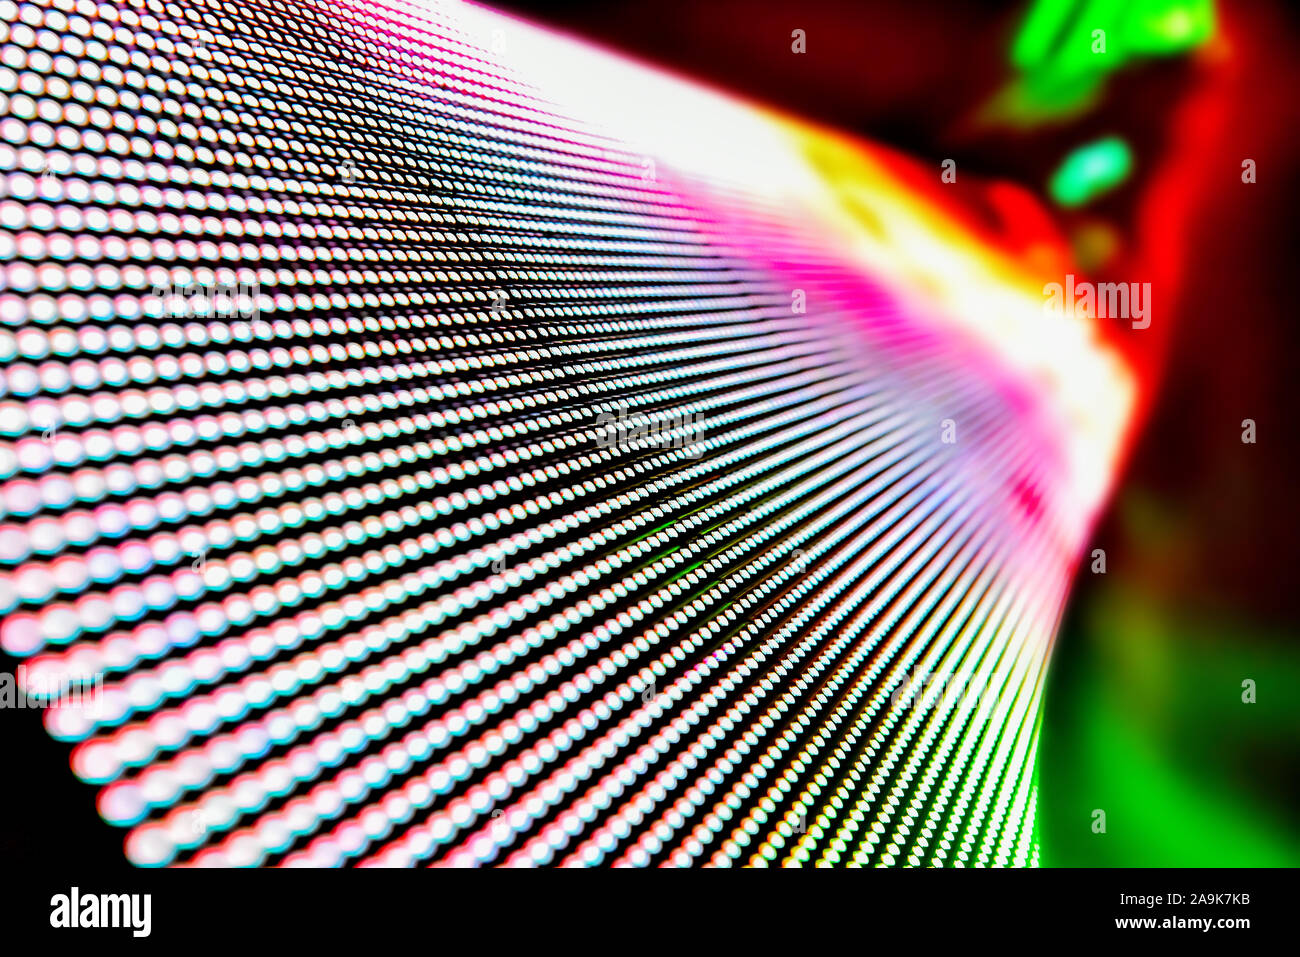 LED soft focus background, Abstract LED Panel art wall falling out of focus Stock Photo